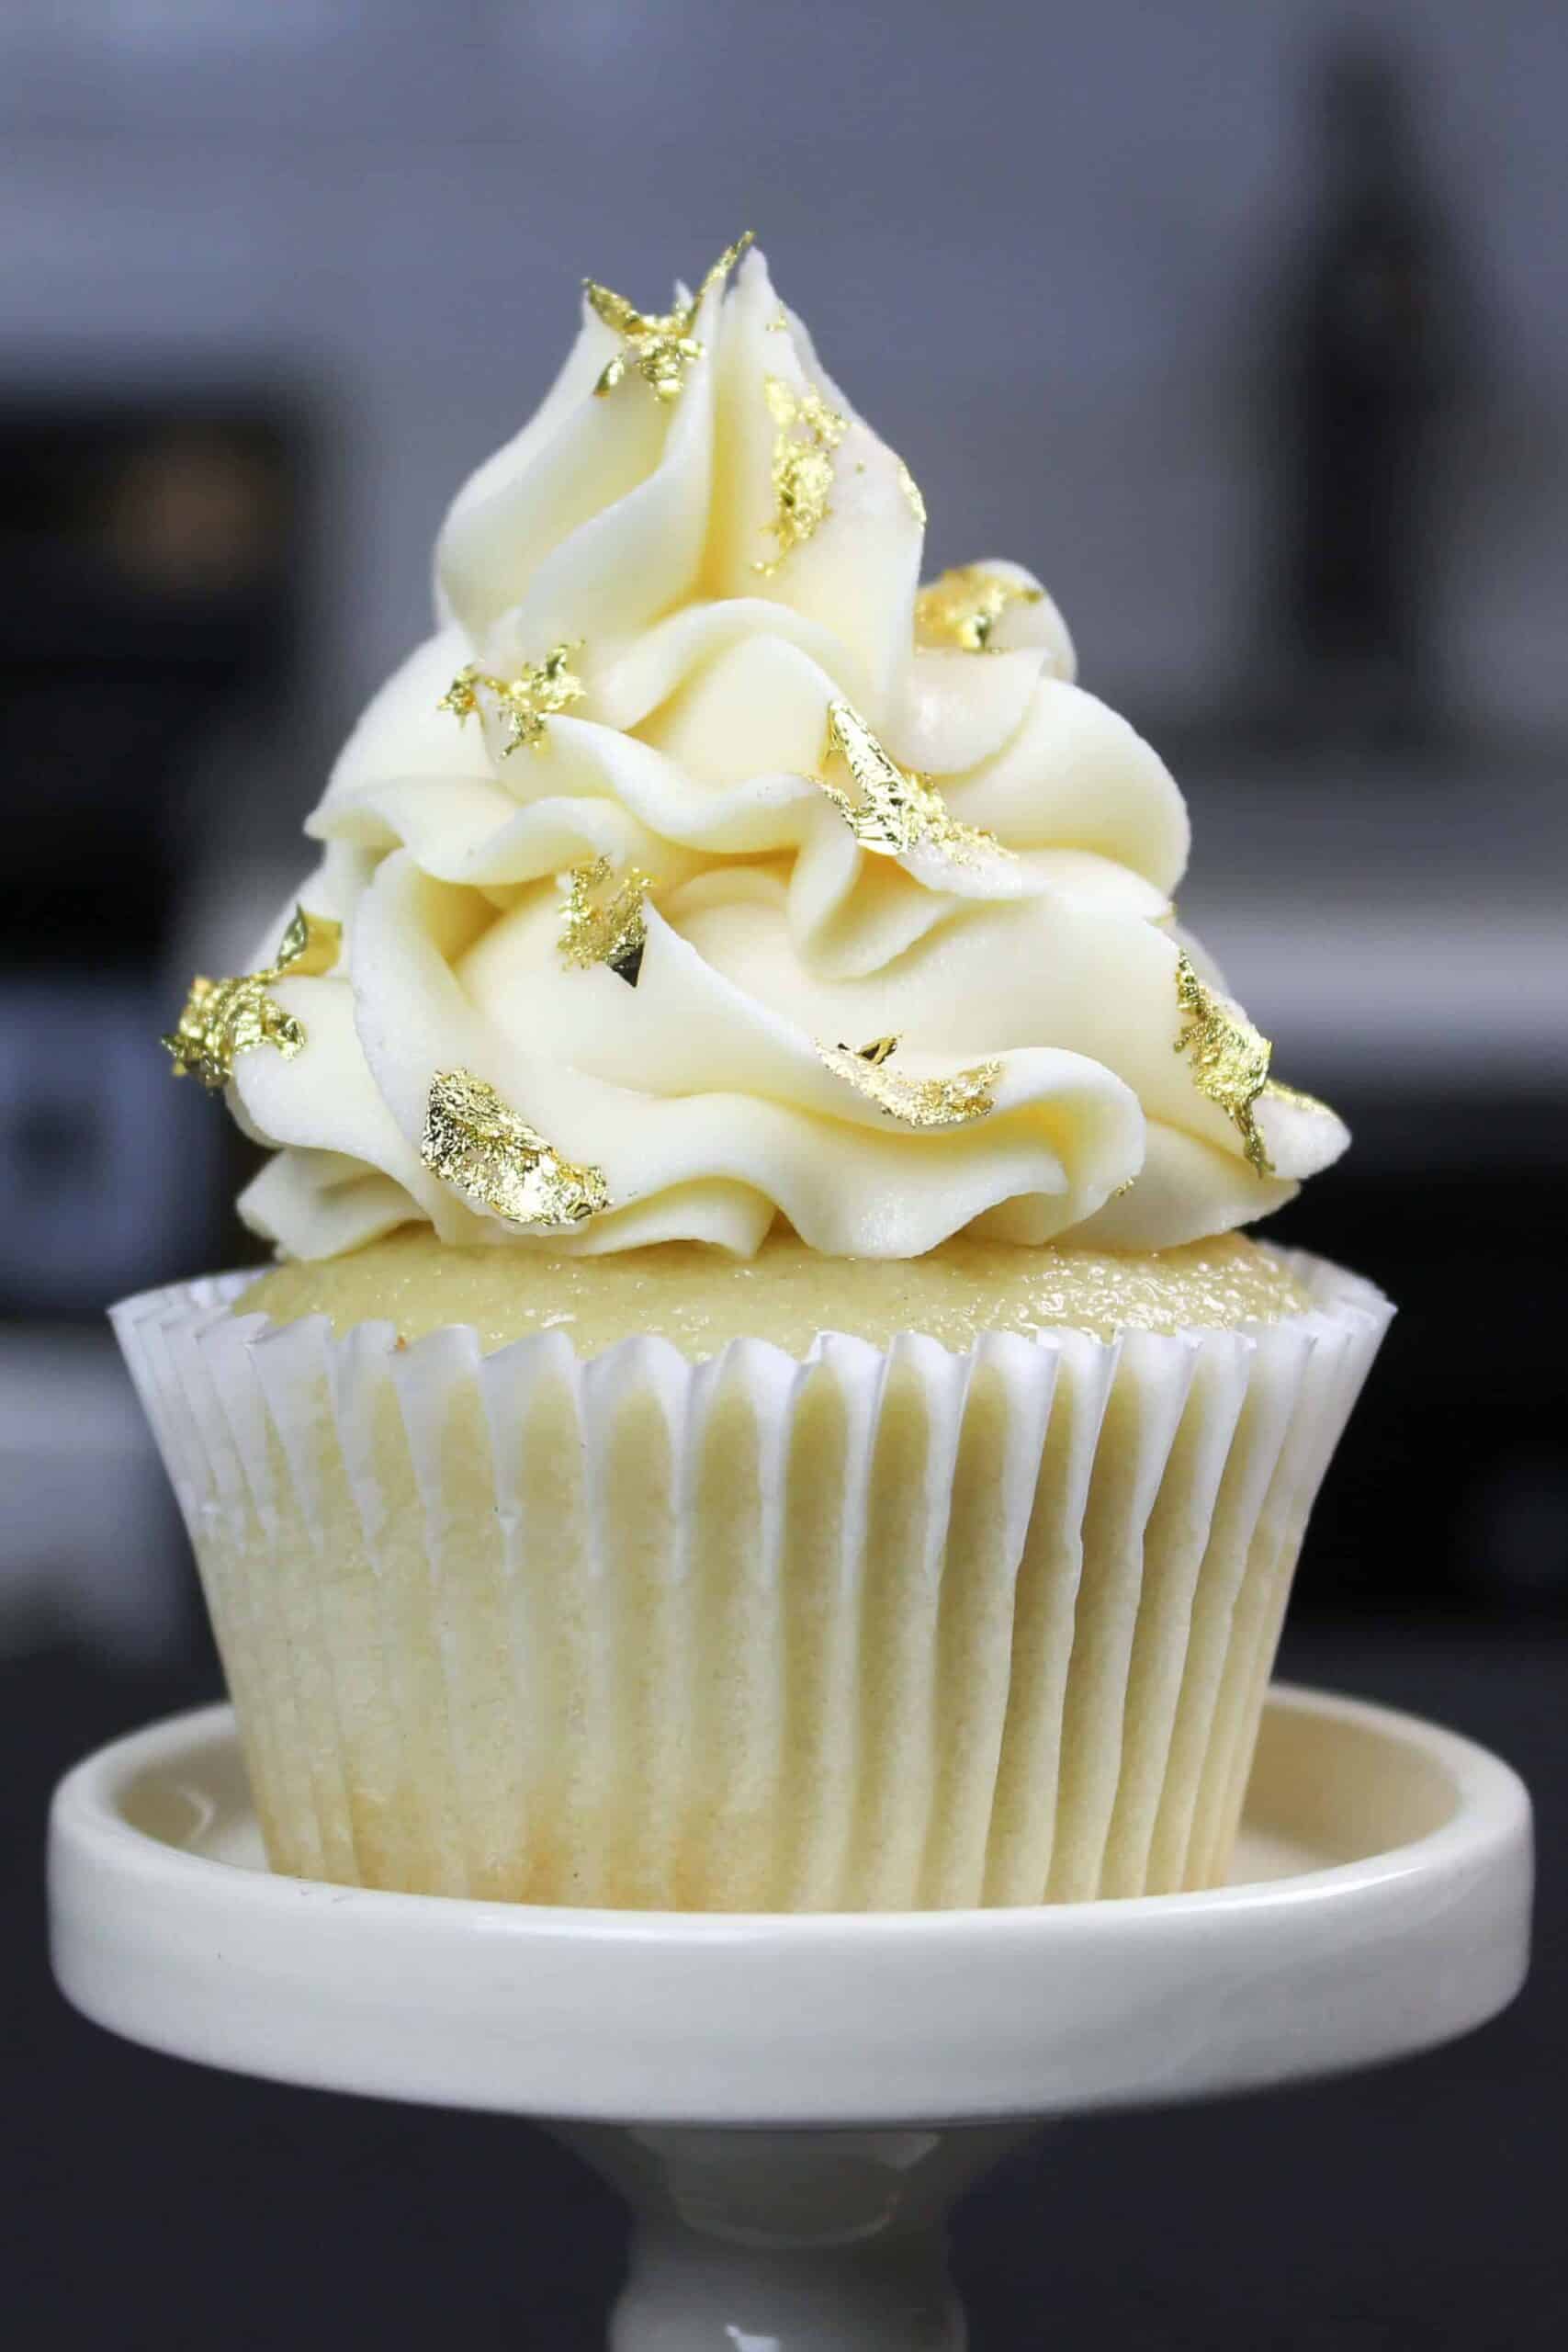 image of moist vanilla cupcake made with oil decorated with edible gold leaf